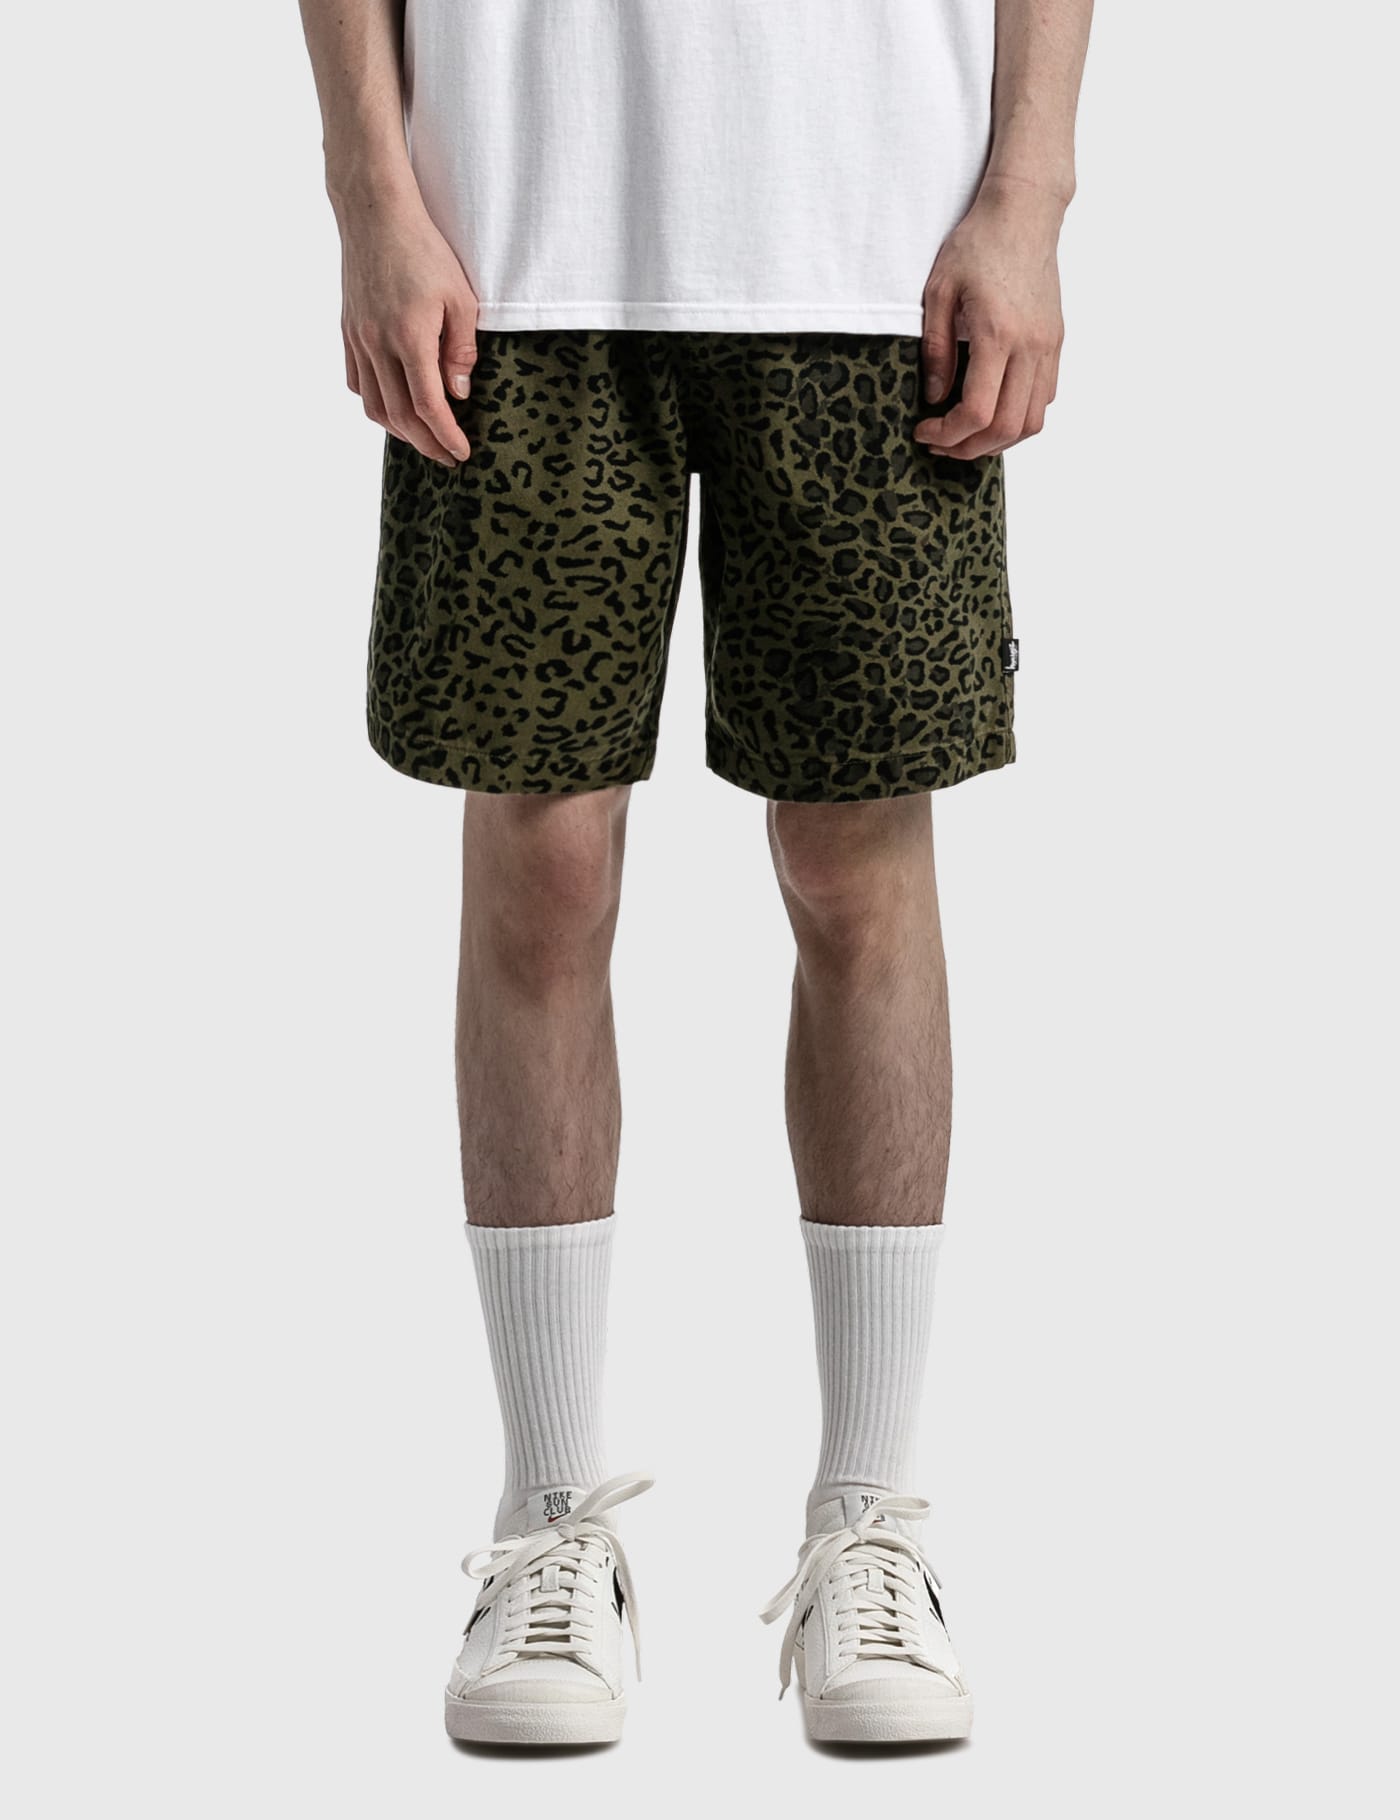 Stüssy - Leopard Beach Shorts | HBX - Globally Curated Fashion and 